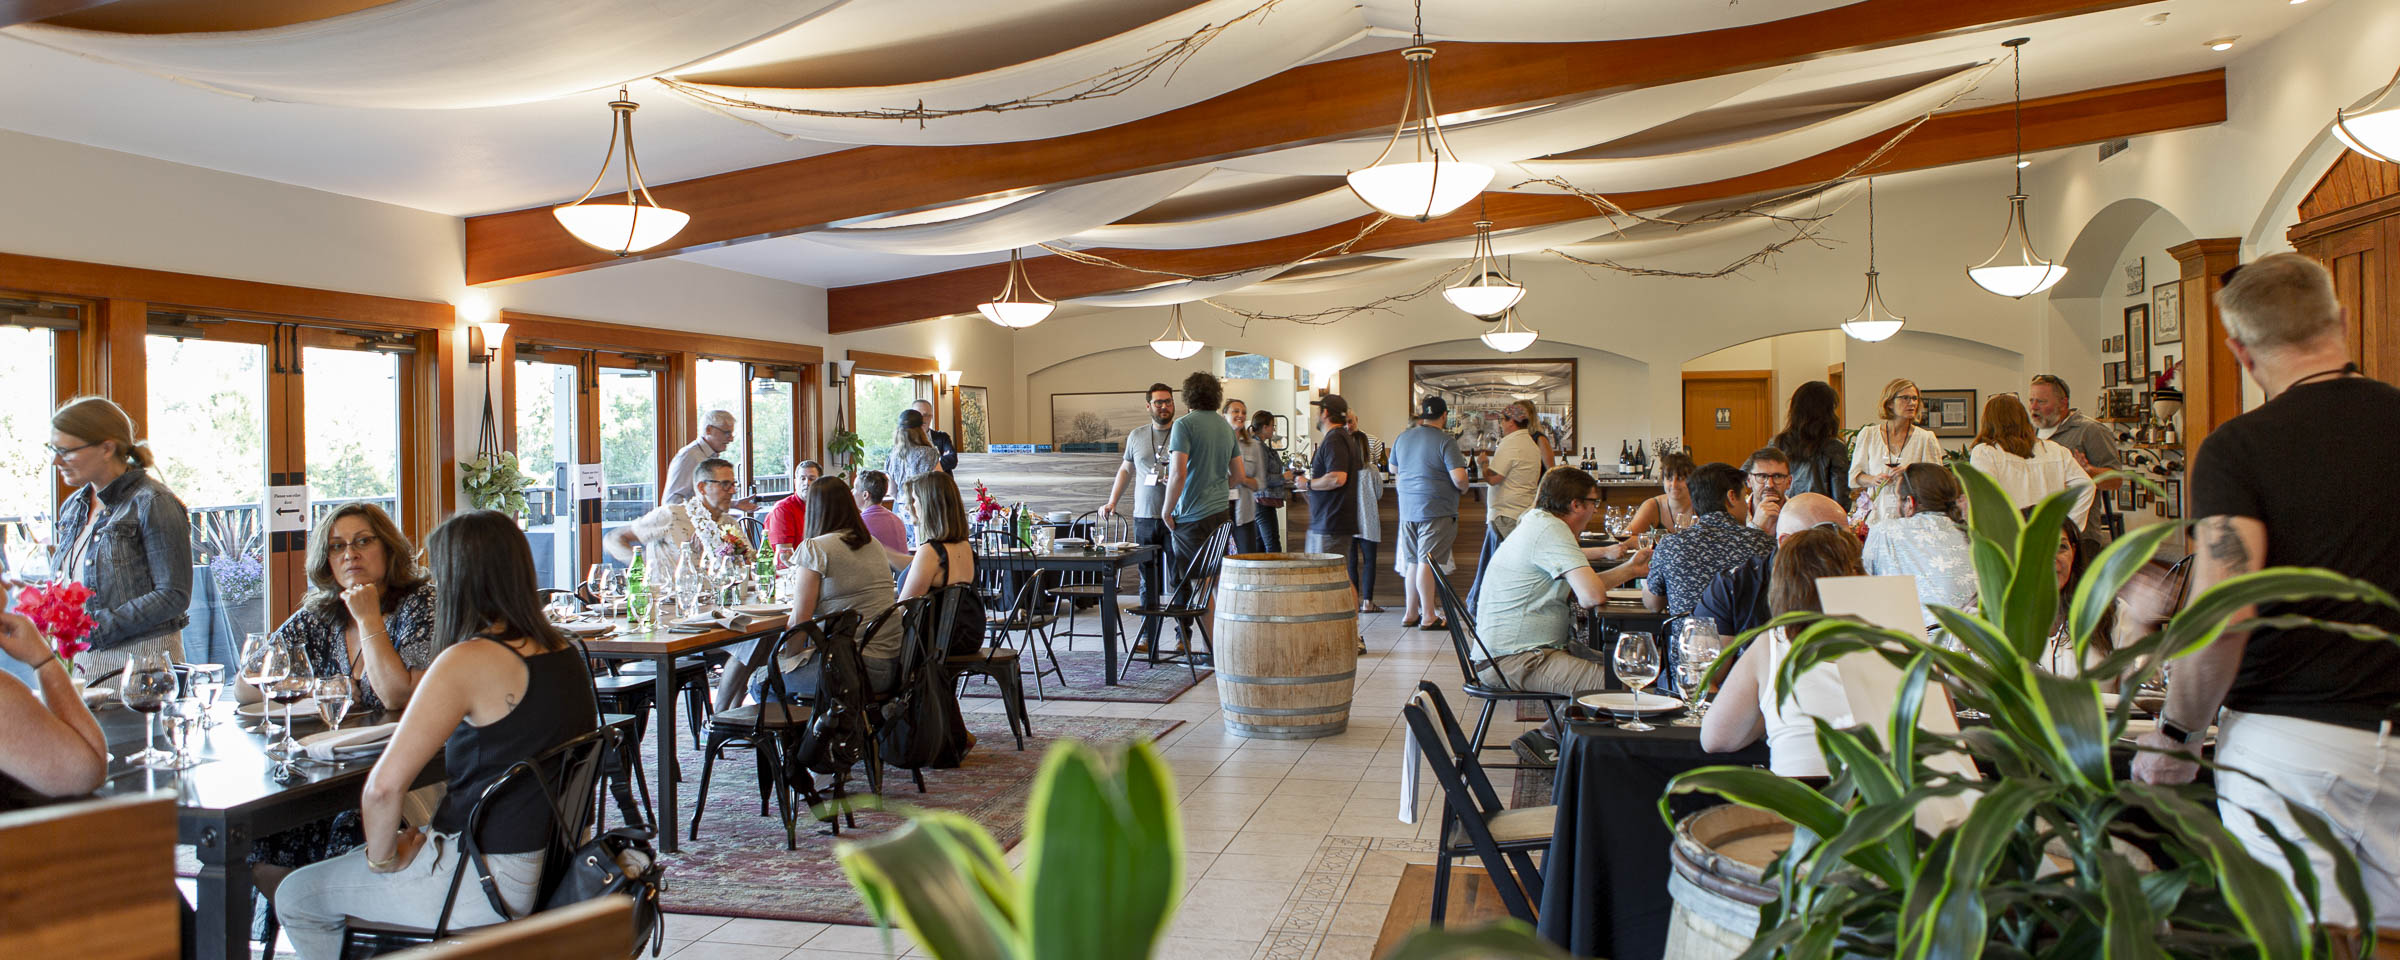 tasting room with tables and chairs and white ceilings with wooden beams and houseplants